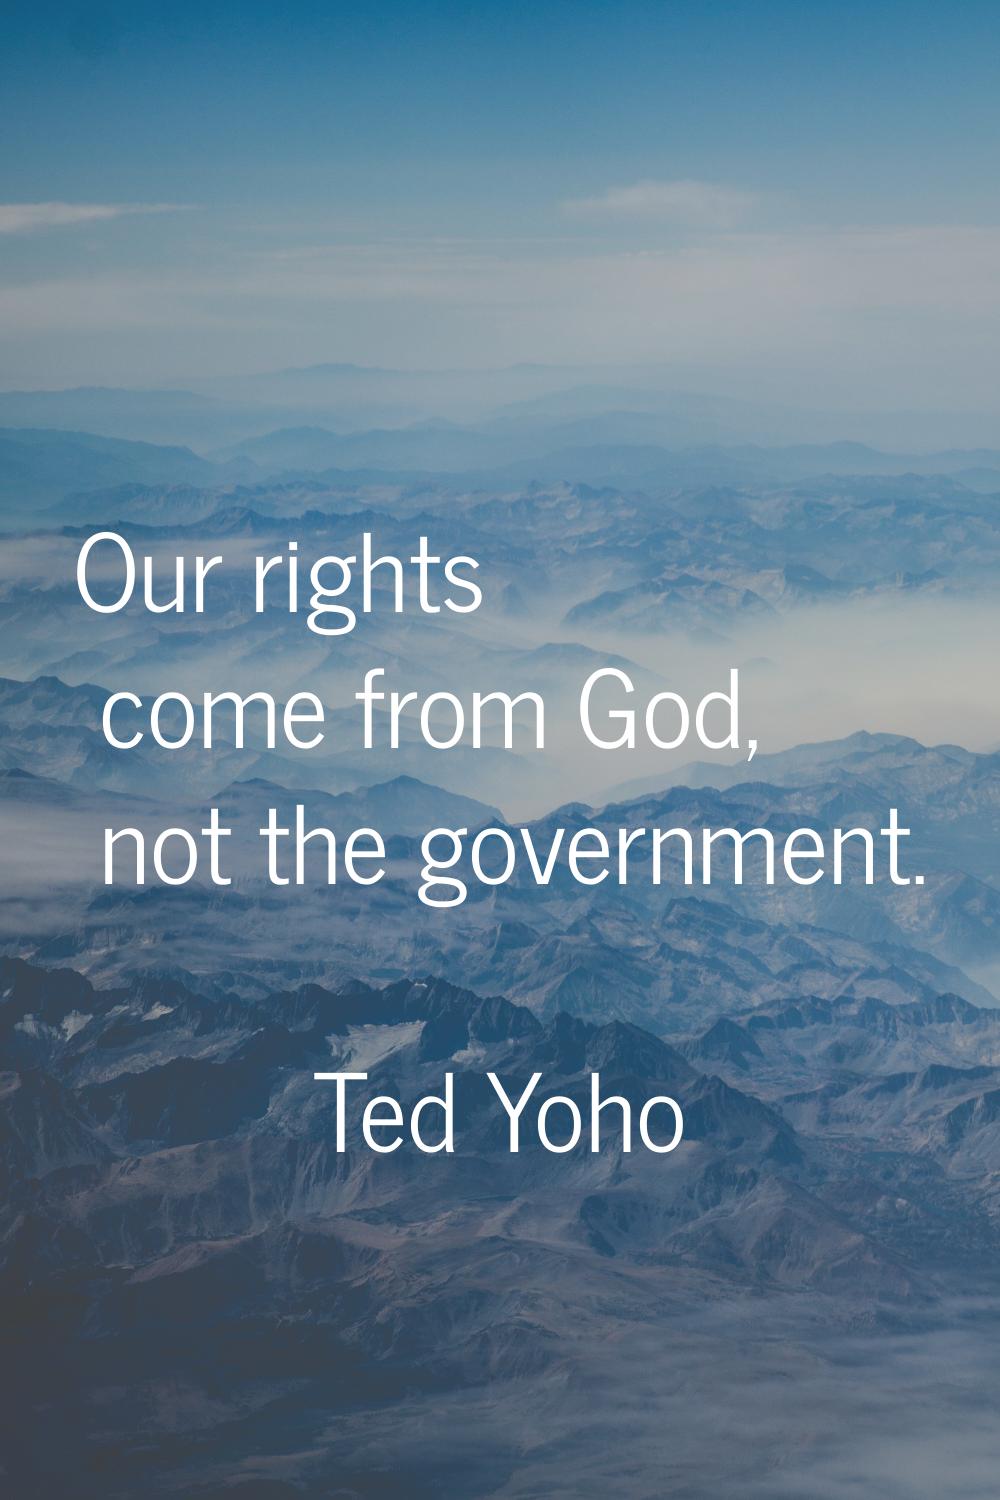 Our rights come from God, not the government.